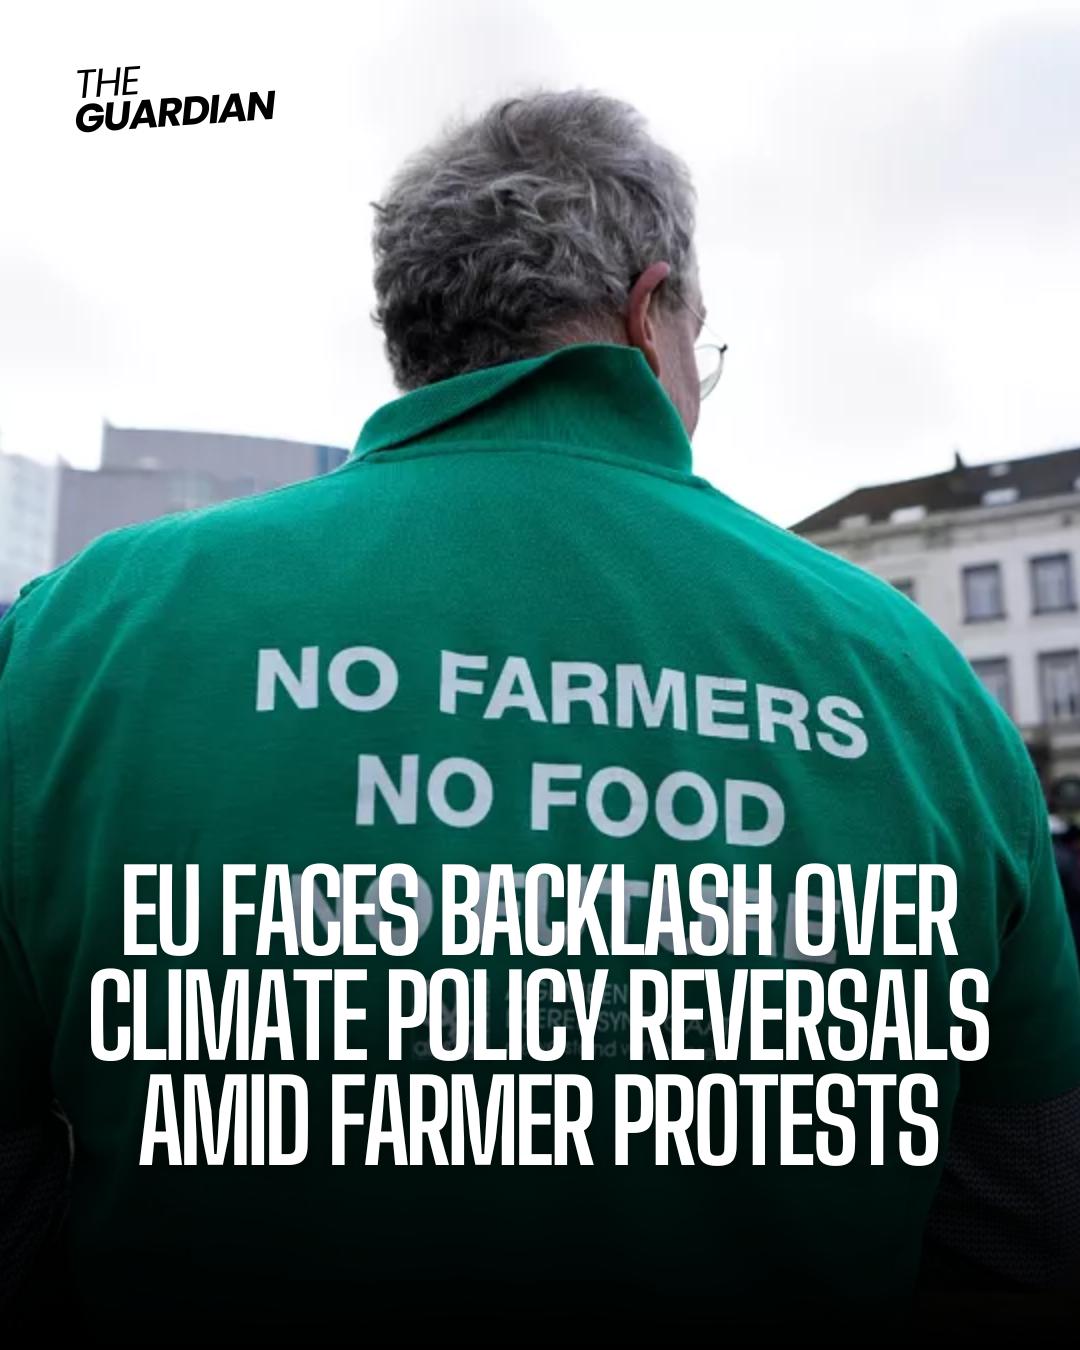 The EU is under criticism as it modifies its climate policies in response to widespread farmer protests throughout the continent.